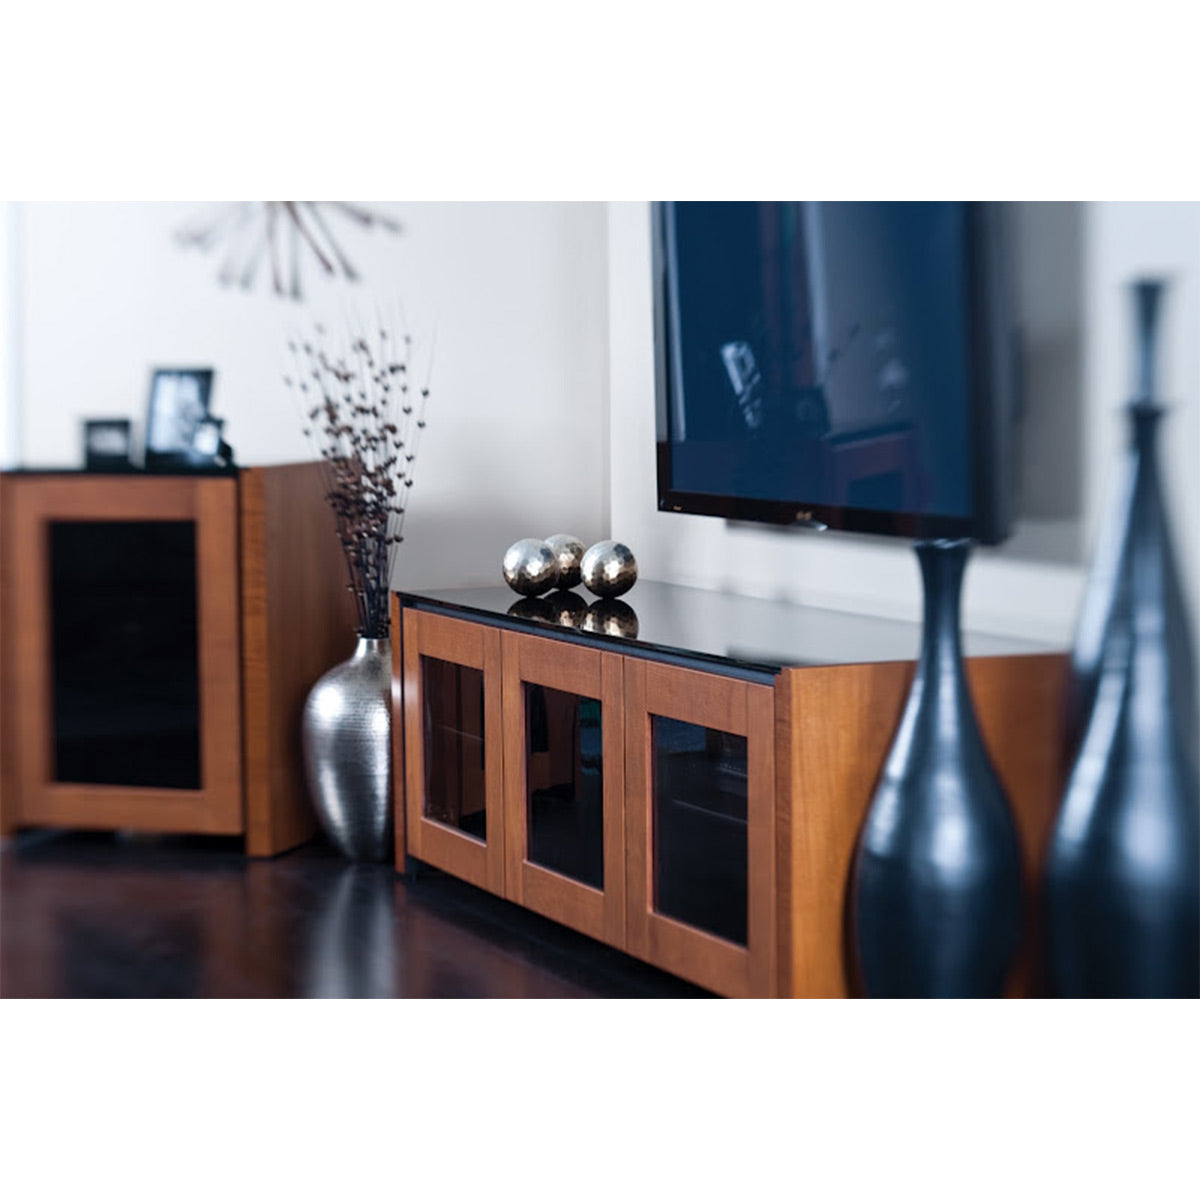 Salamander Chameleon Collection Corsica 237 Triple AV Cabinet (Thick Cherry with Black Glass Top)